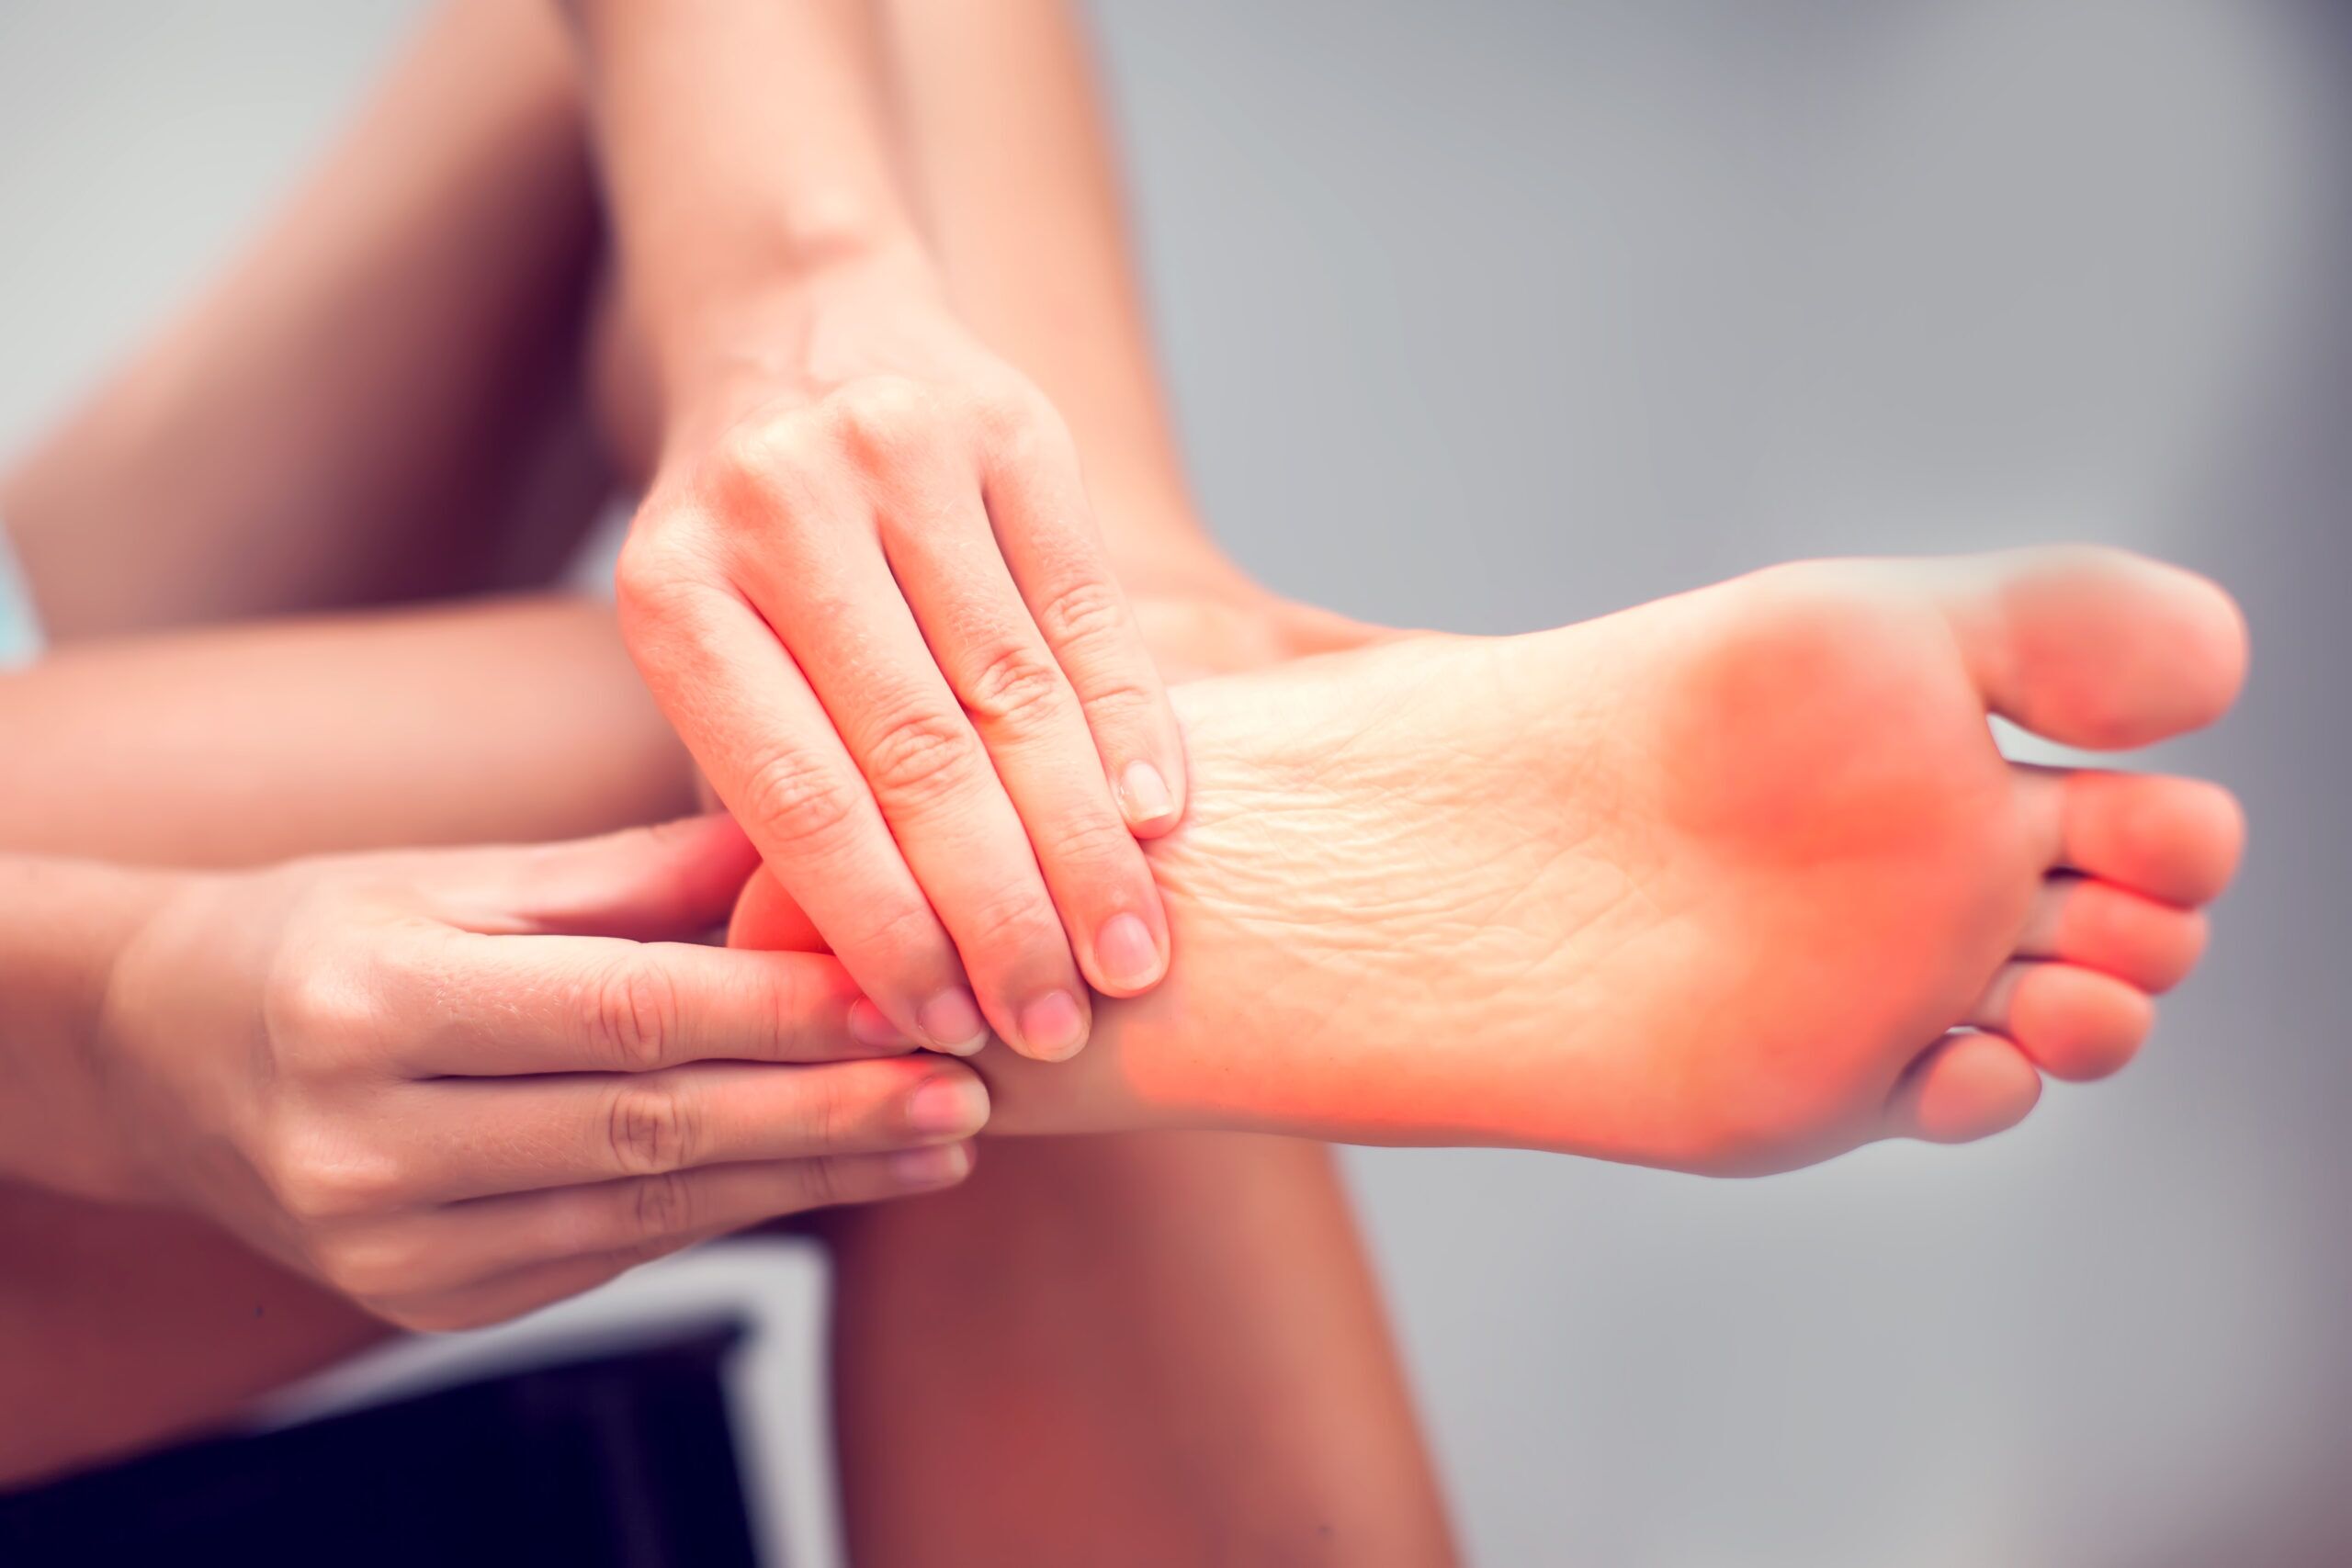 Posterior heel pain — Chelsea and Westminster Hospital NHS Foundation Trust